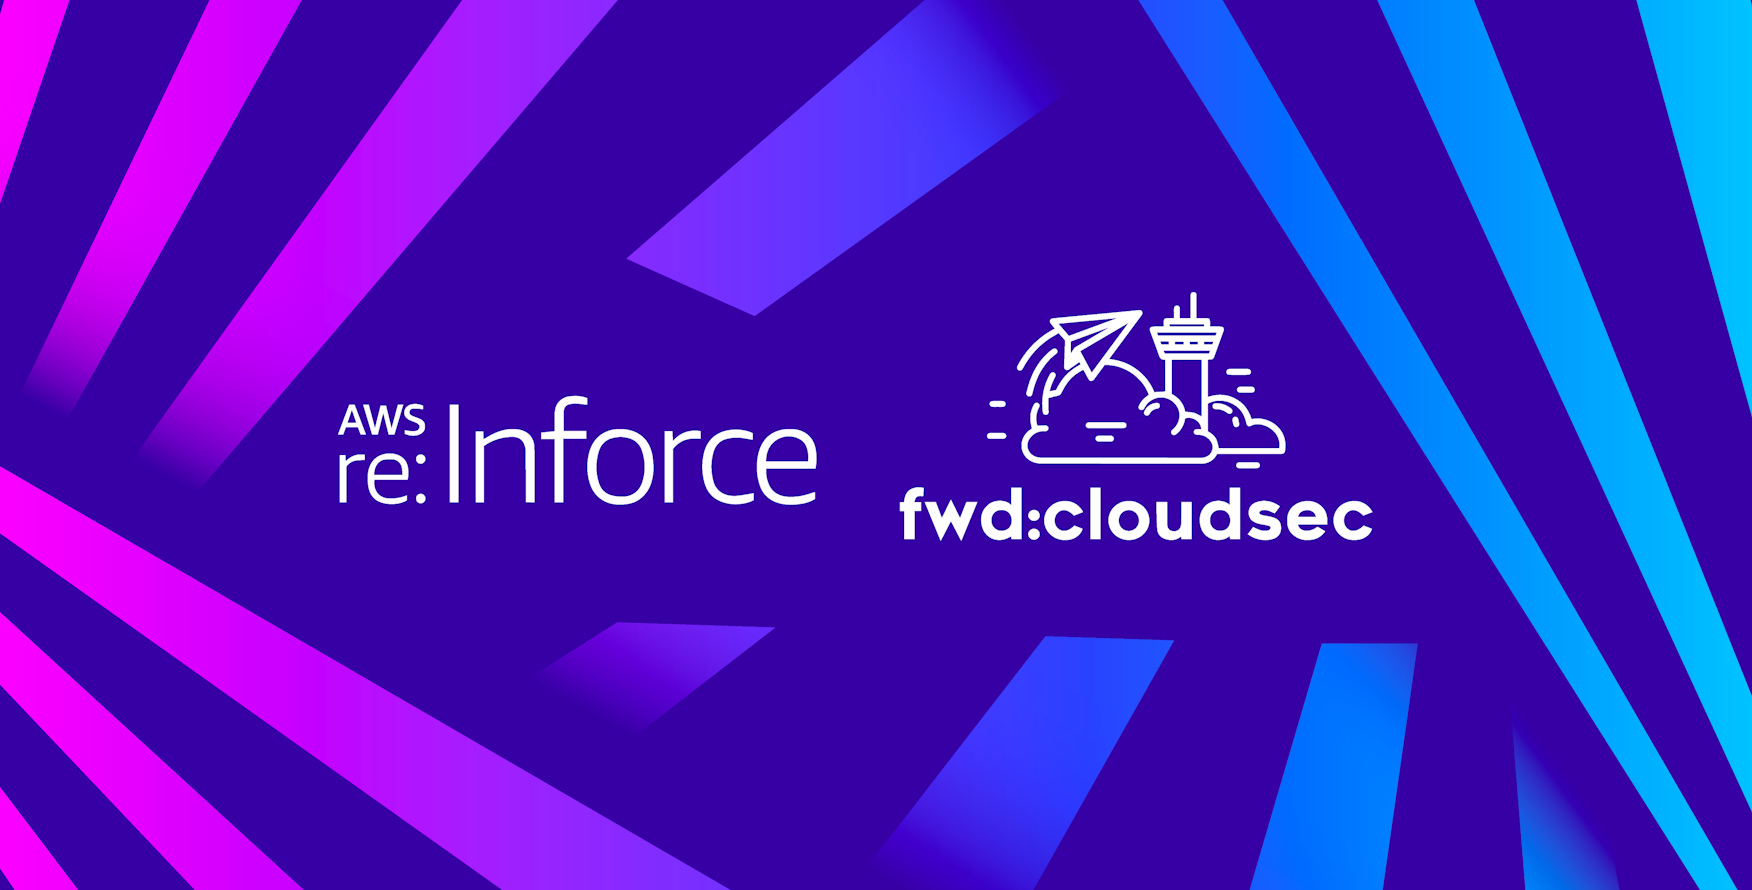 Highlights From Fwd:cloudsec And Re:inforce 2022